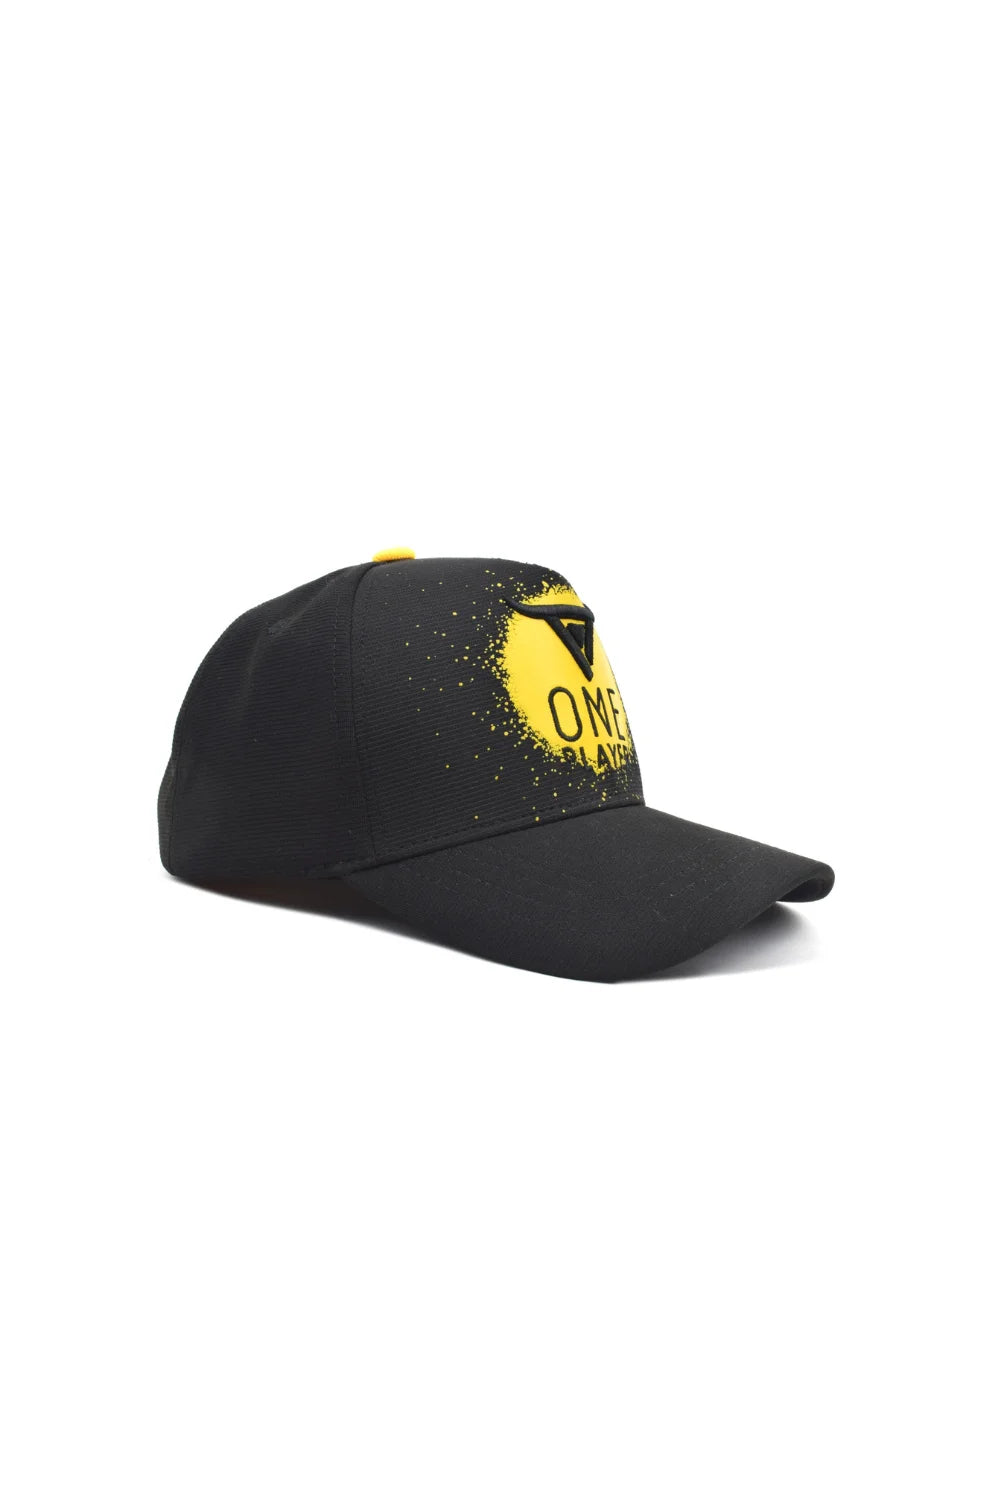 Unisex Black & Yellow Solid Baseball cap, has a visor by One Player